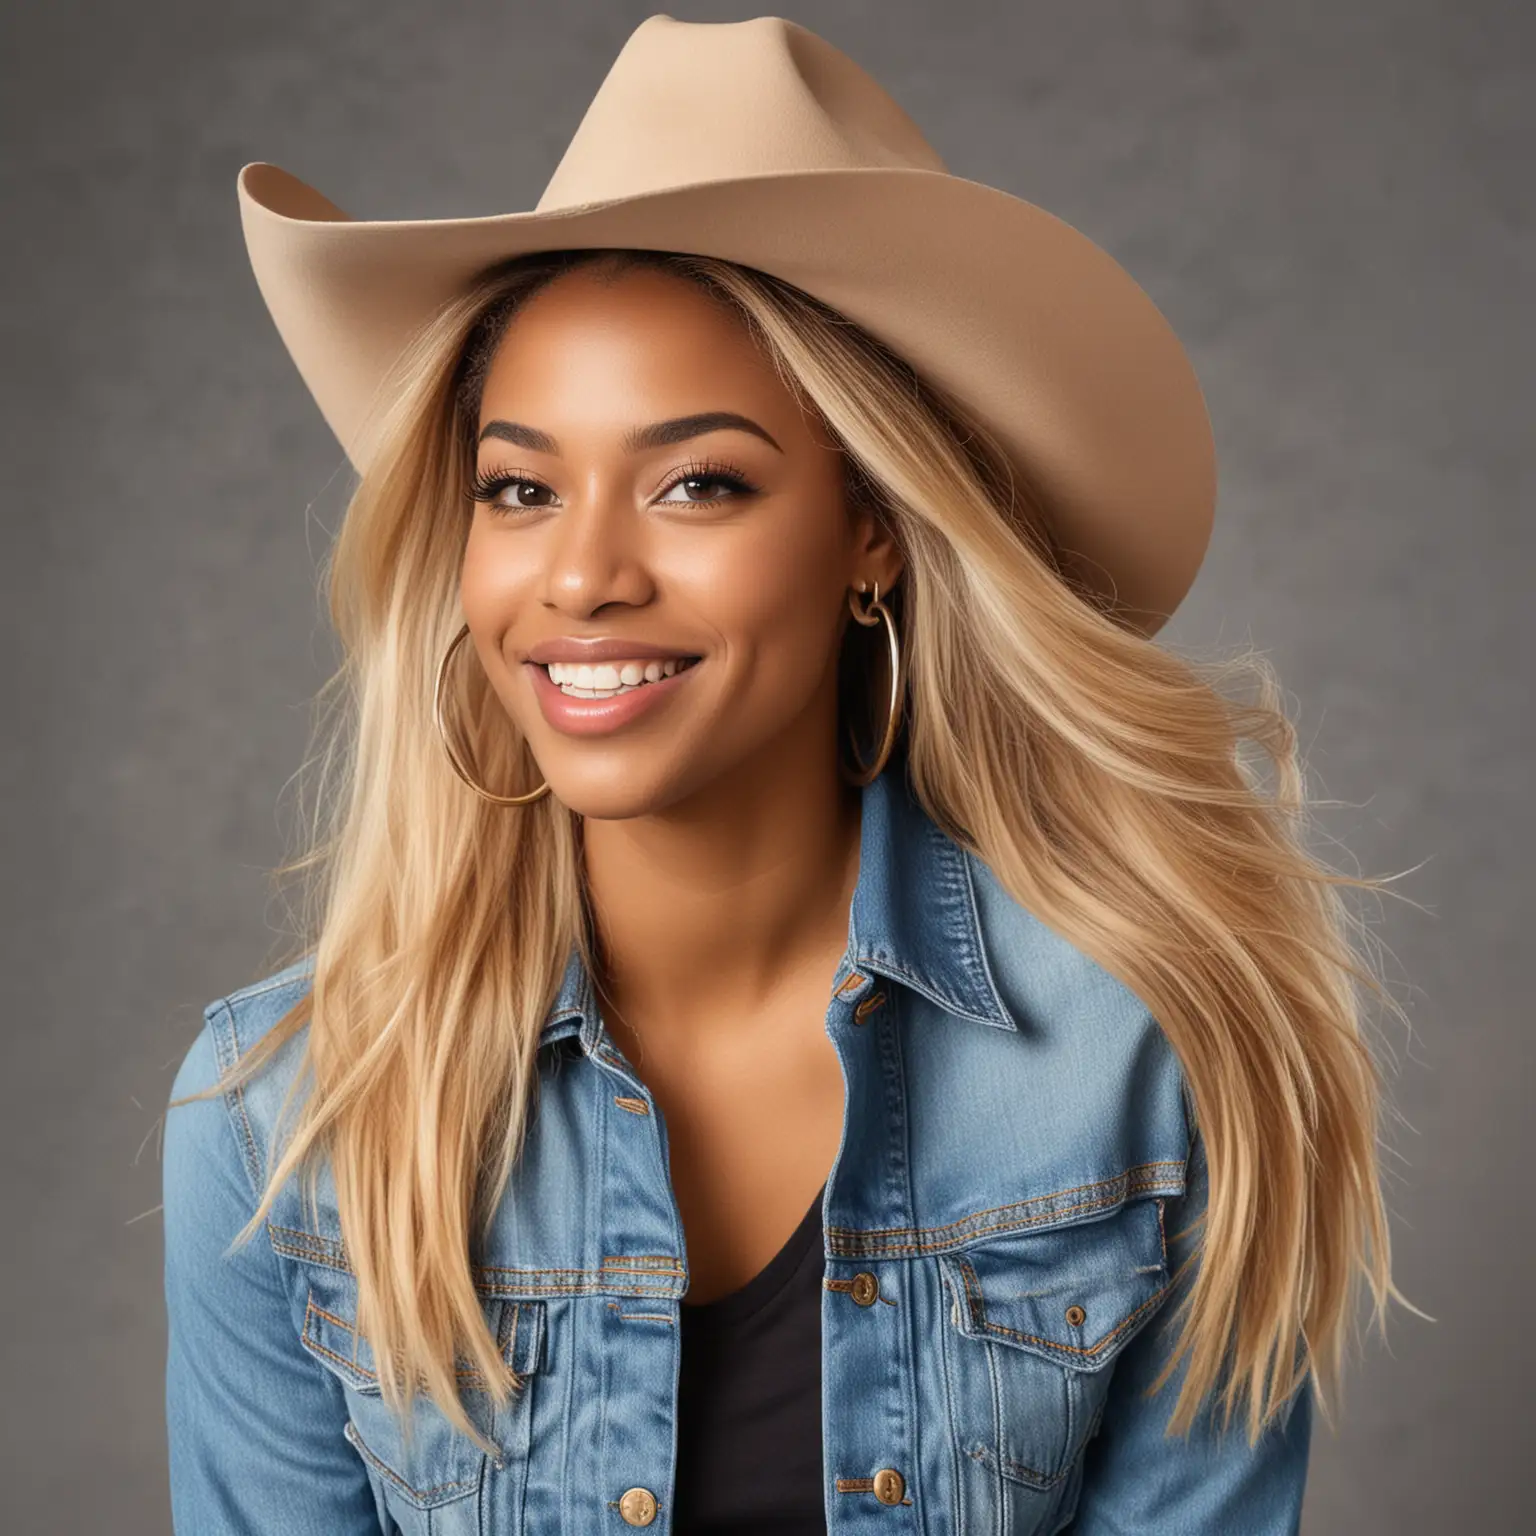 African American woman with long blonde hair, brown cowboy hat, long eyelashes, black eye liner, blush on her cheeks, large hoop earrings, t-shirt with a horse on it, blue jeans, jean jacket, cowboy boots, smiling., standing up,